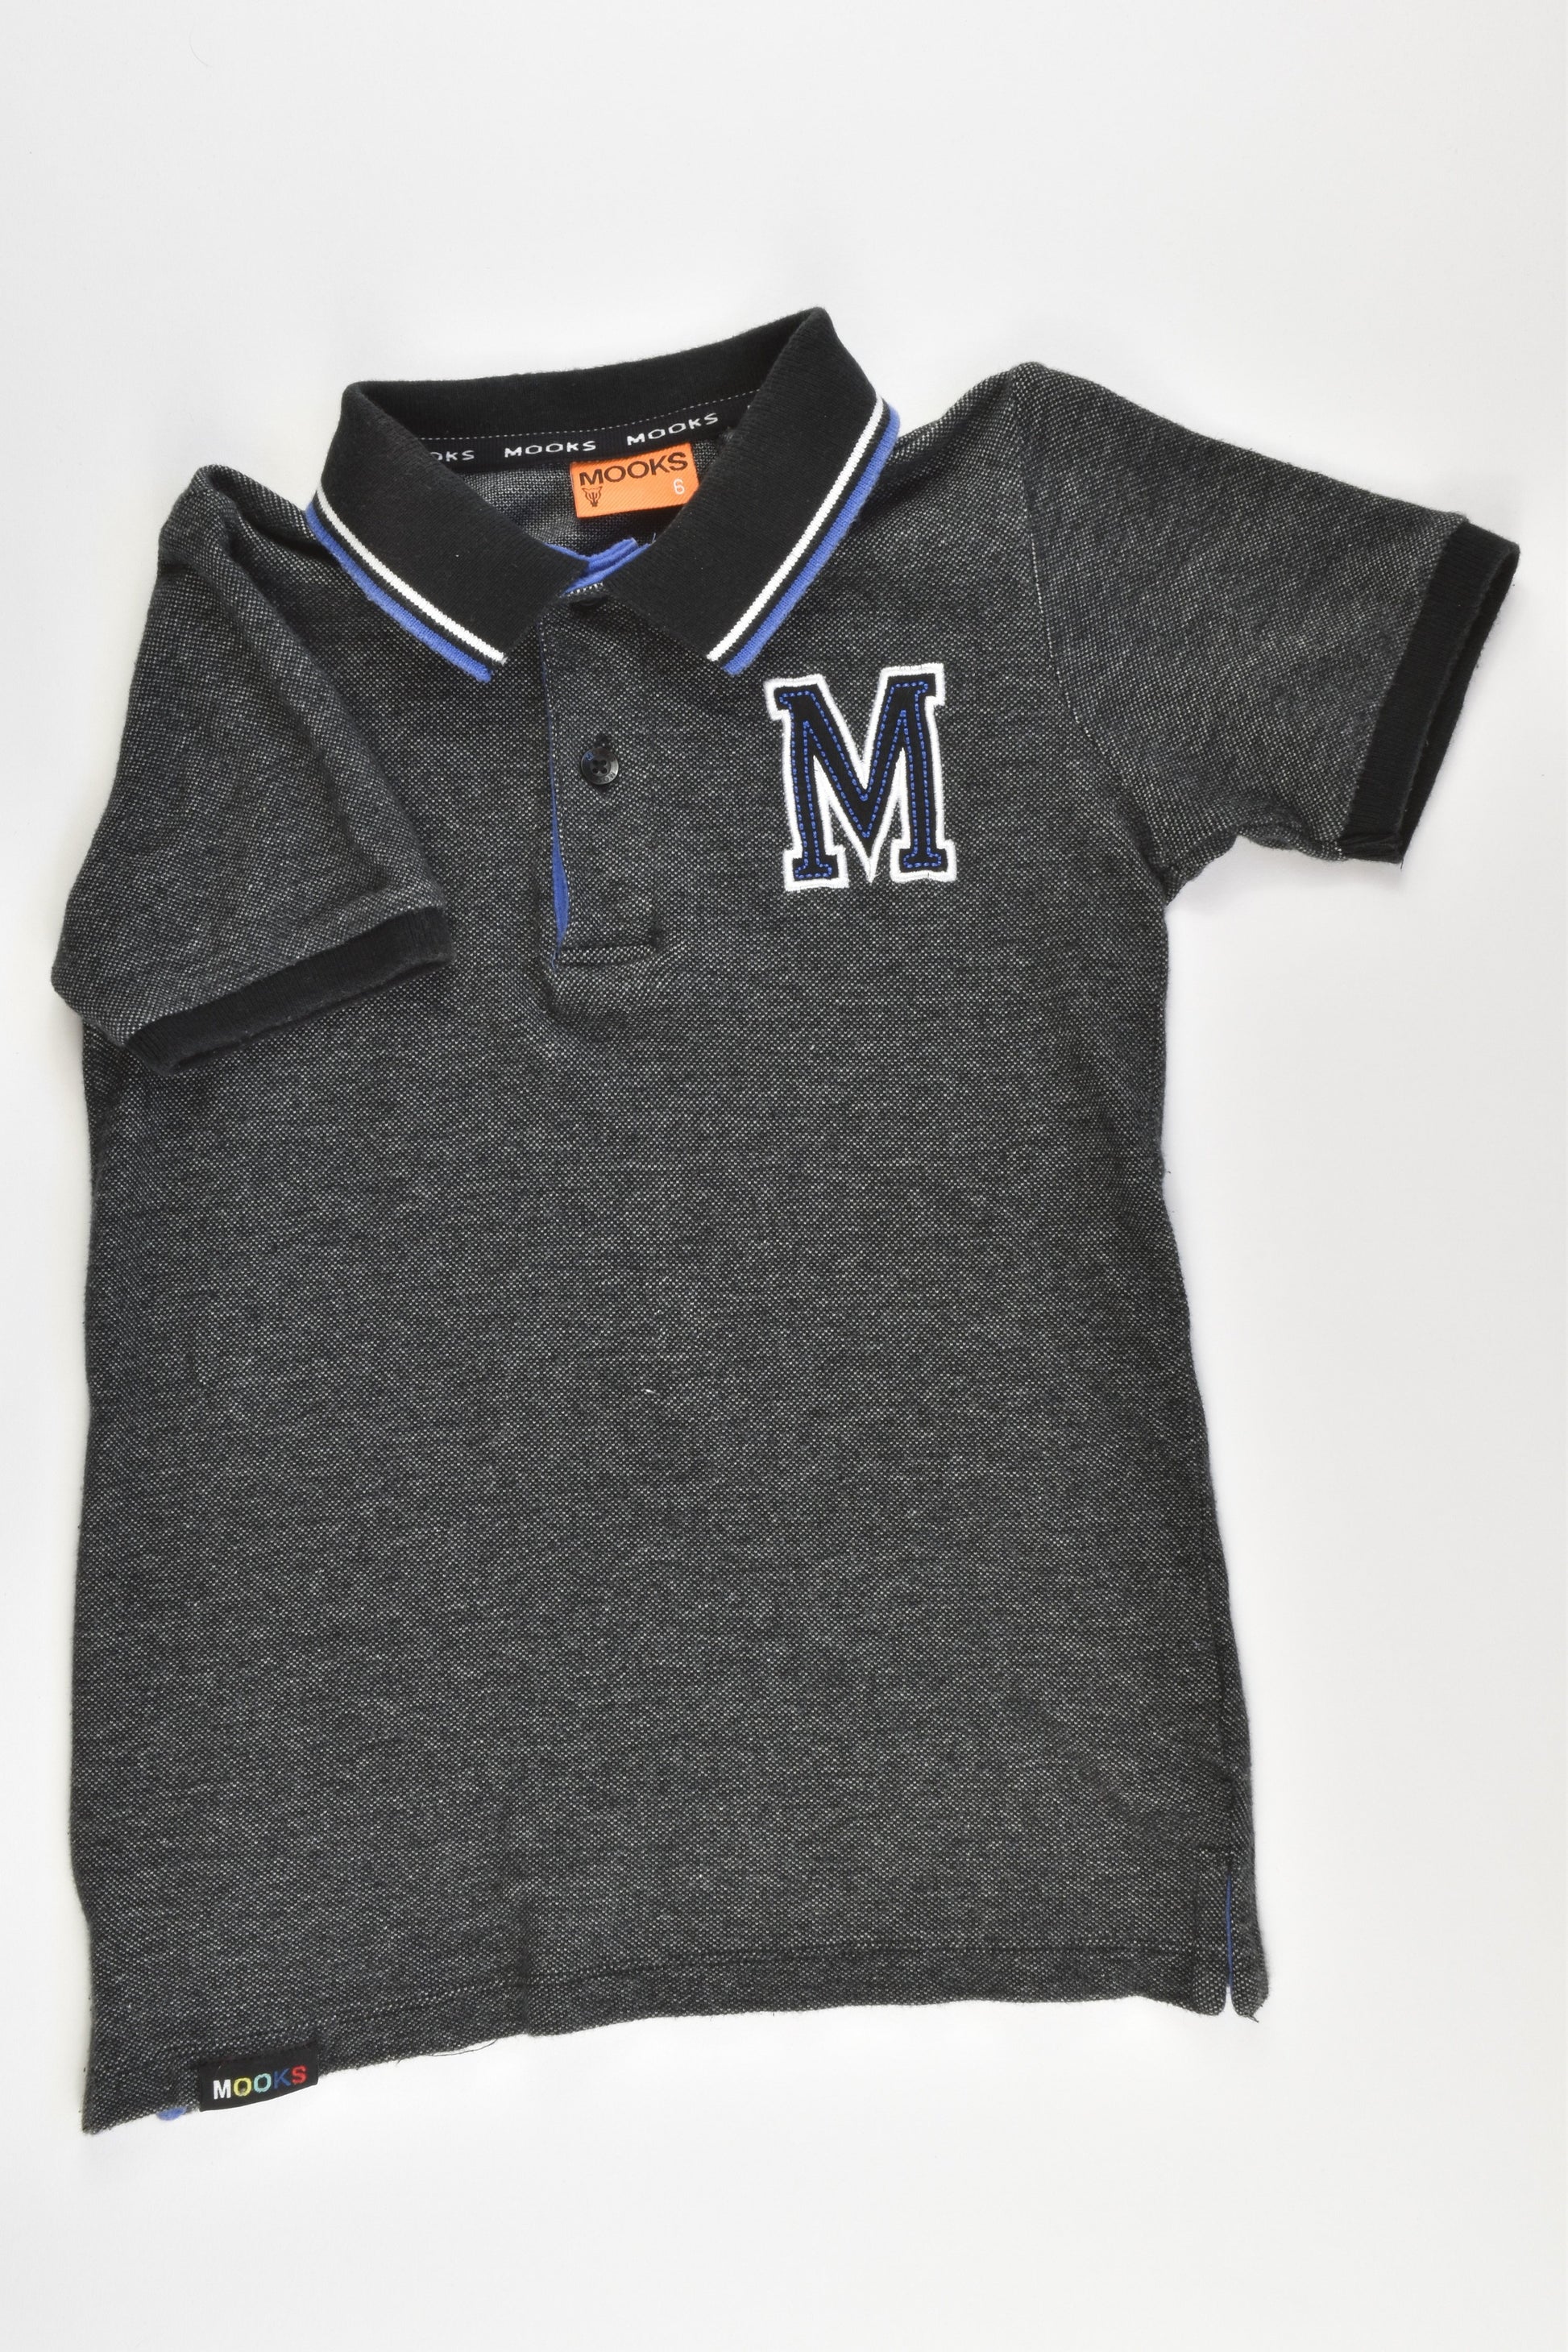 Mooks Size 6 Collared T-shirt